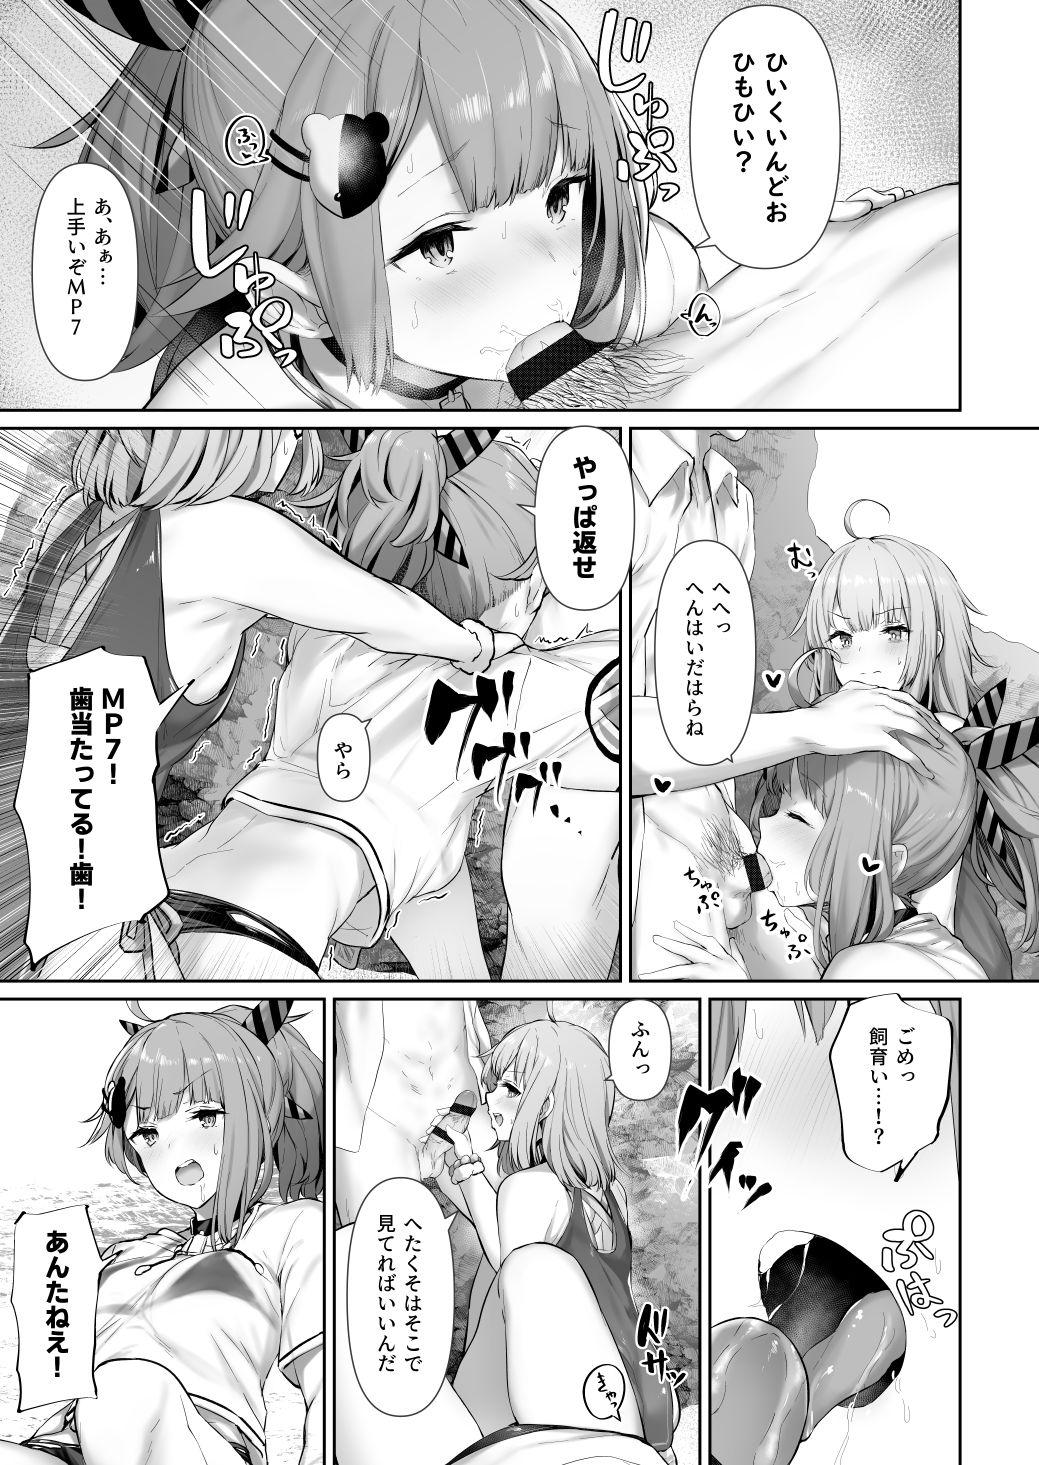 Woman Fucking MP7 and AA-12 - Girls frontline Francais - Page 3